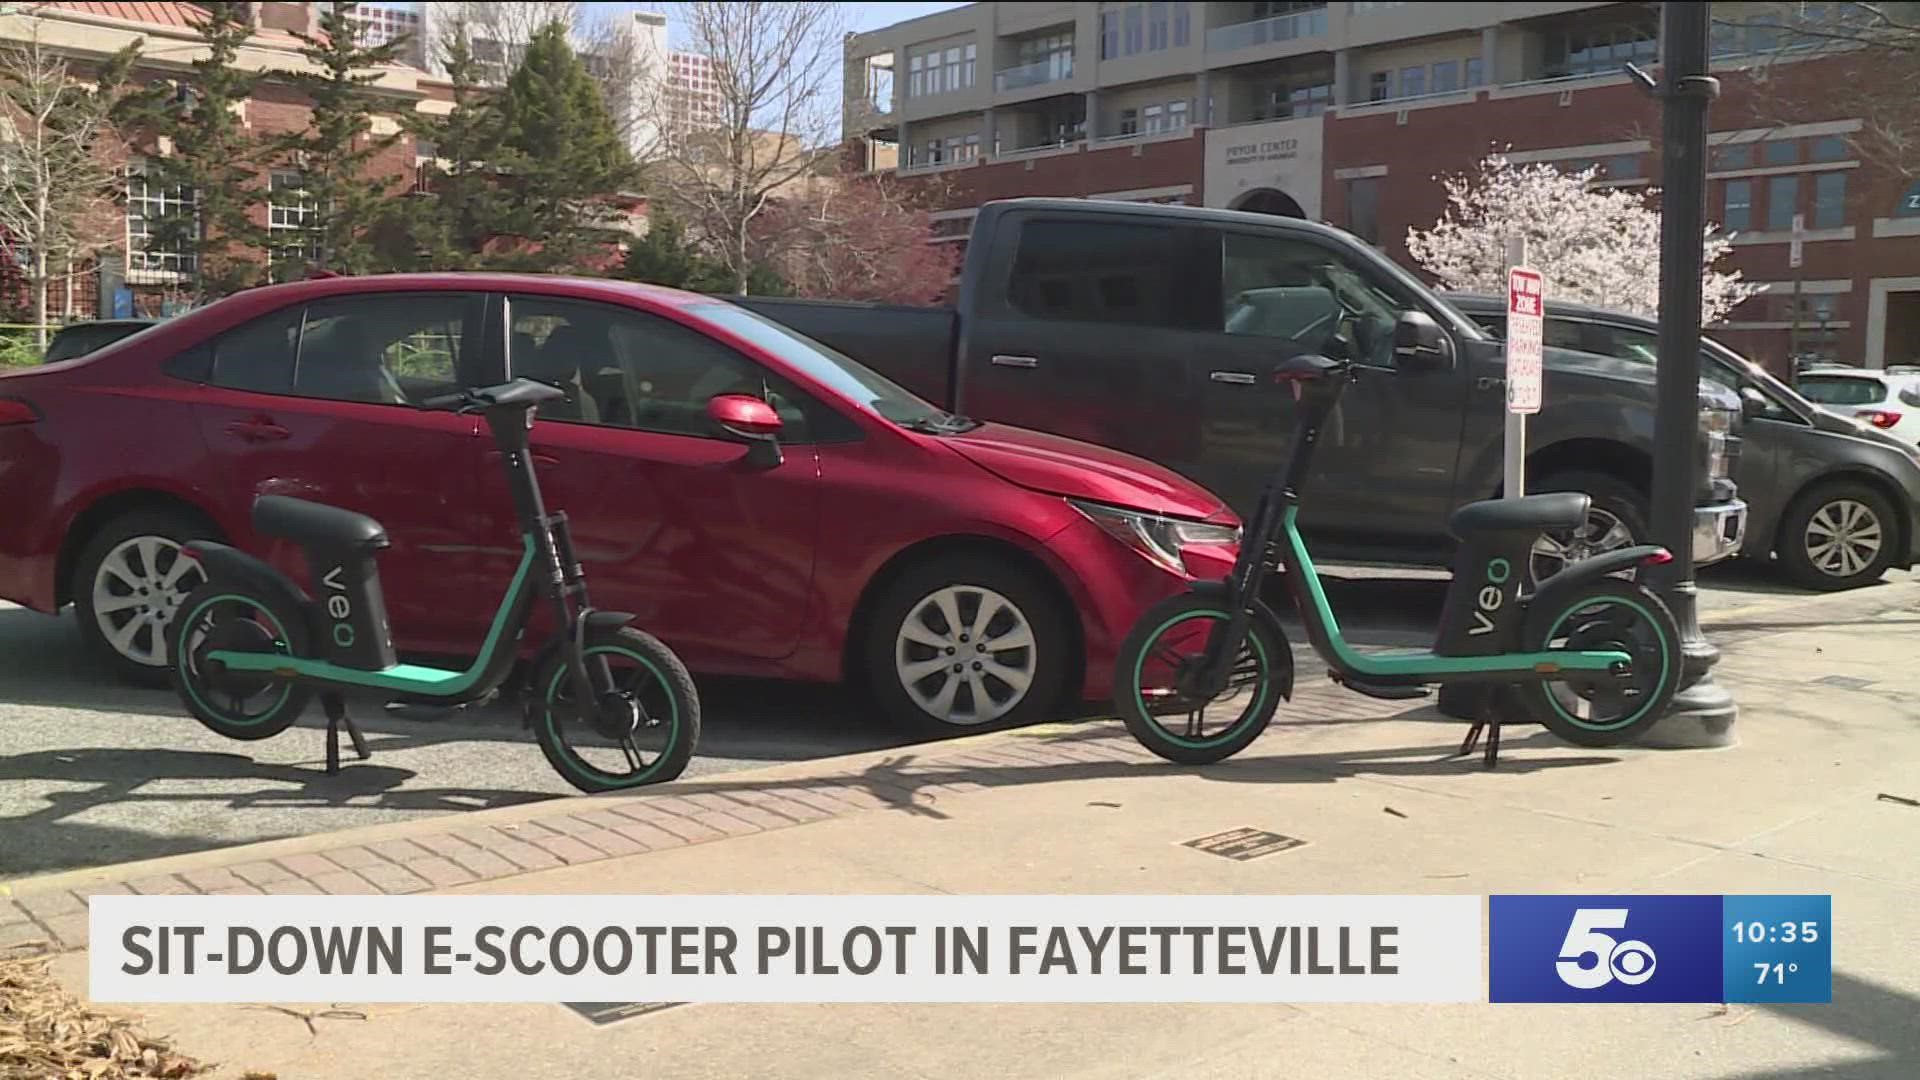 The City of Fayetteville is piloting the new "Cosmo" sit-down e-scooter, which can be ridden anywhere bicycles are allowed.